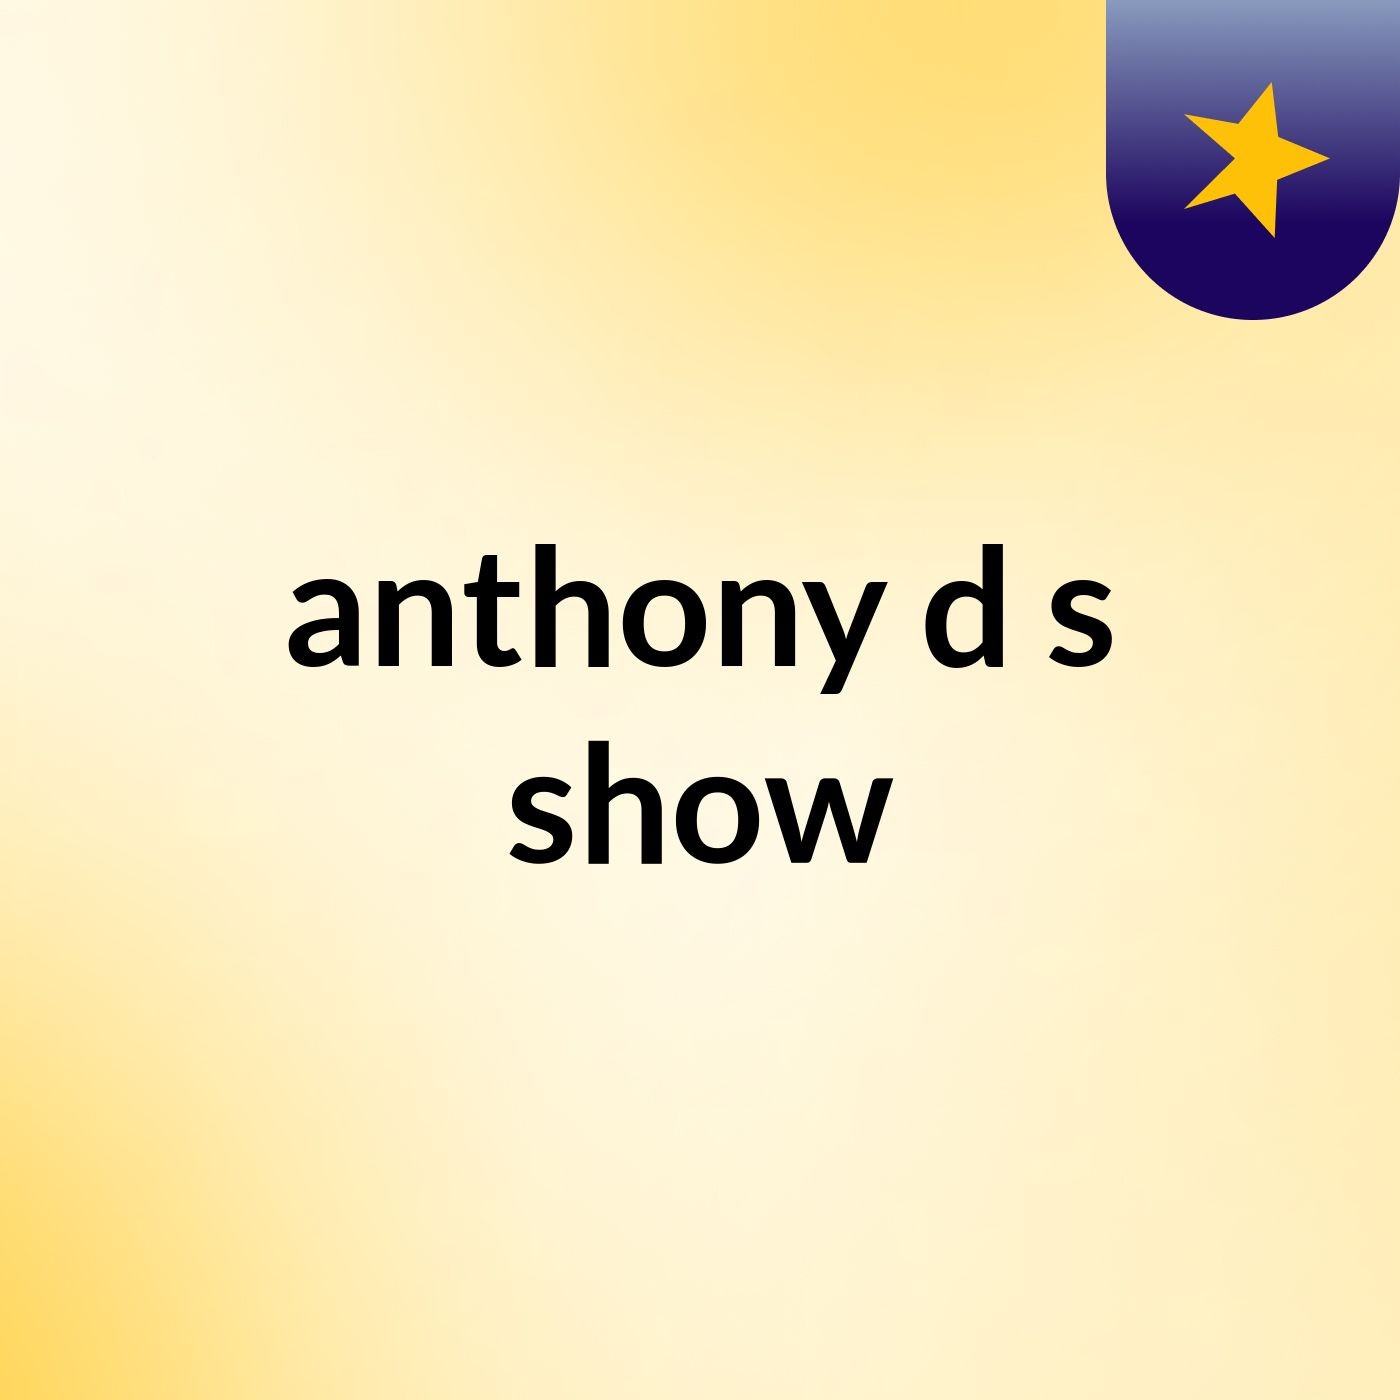 anthony d's show